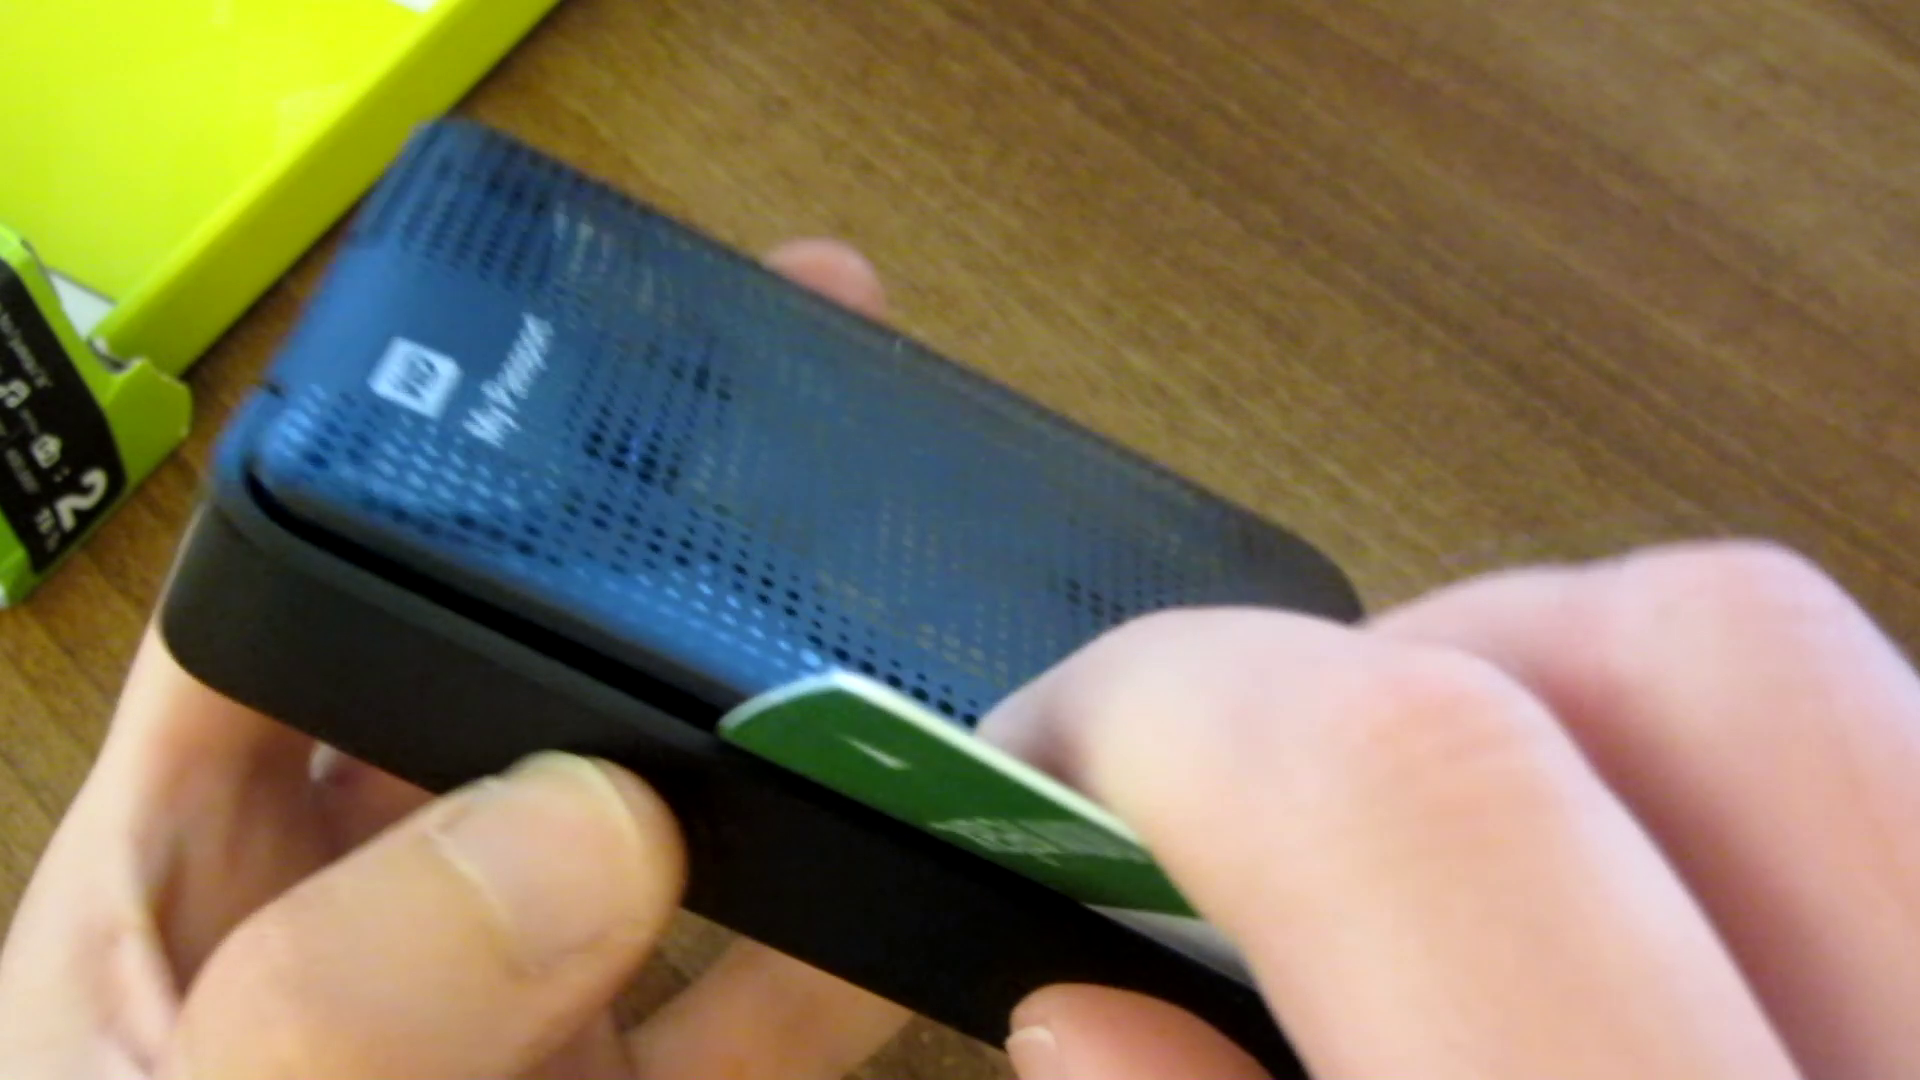 showing a credit card belind slid down the edge of the case, part of showing how to Dismantle a Western Digital My Passport Drive